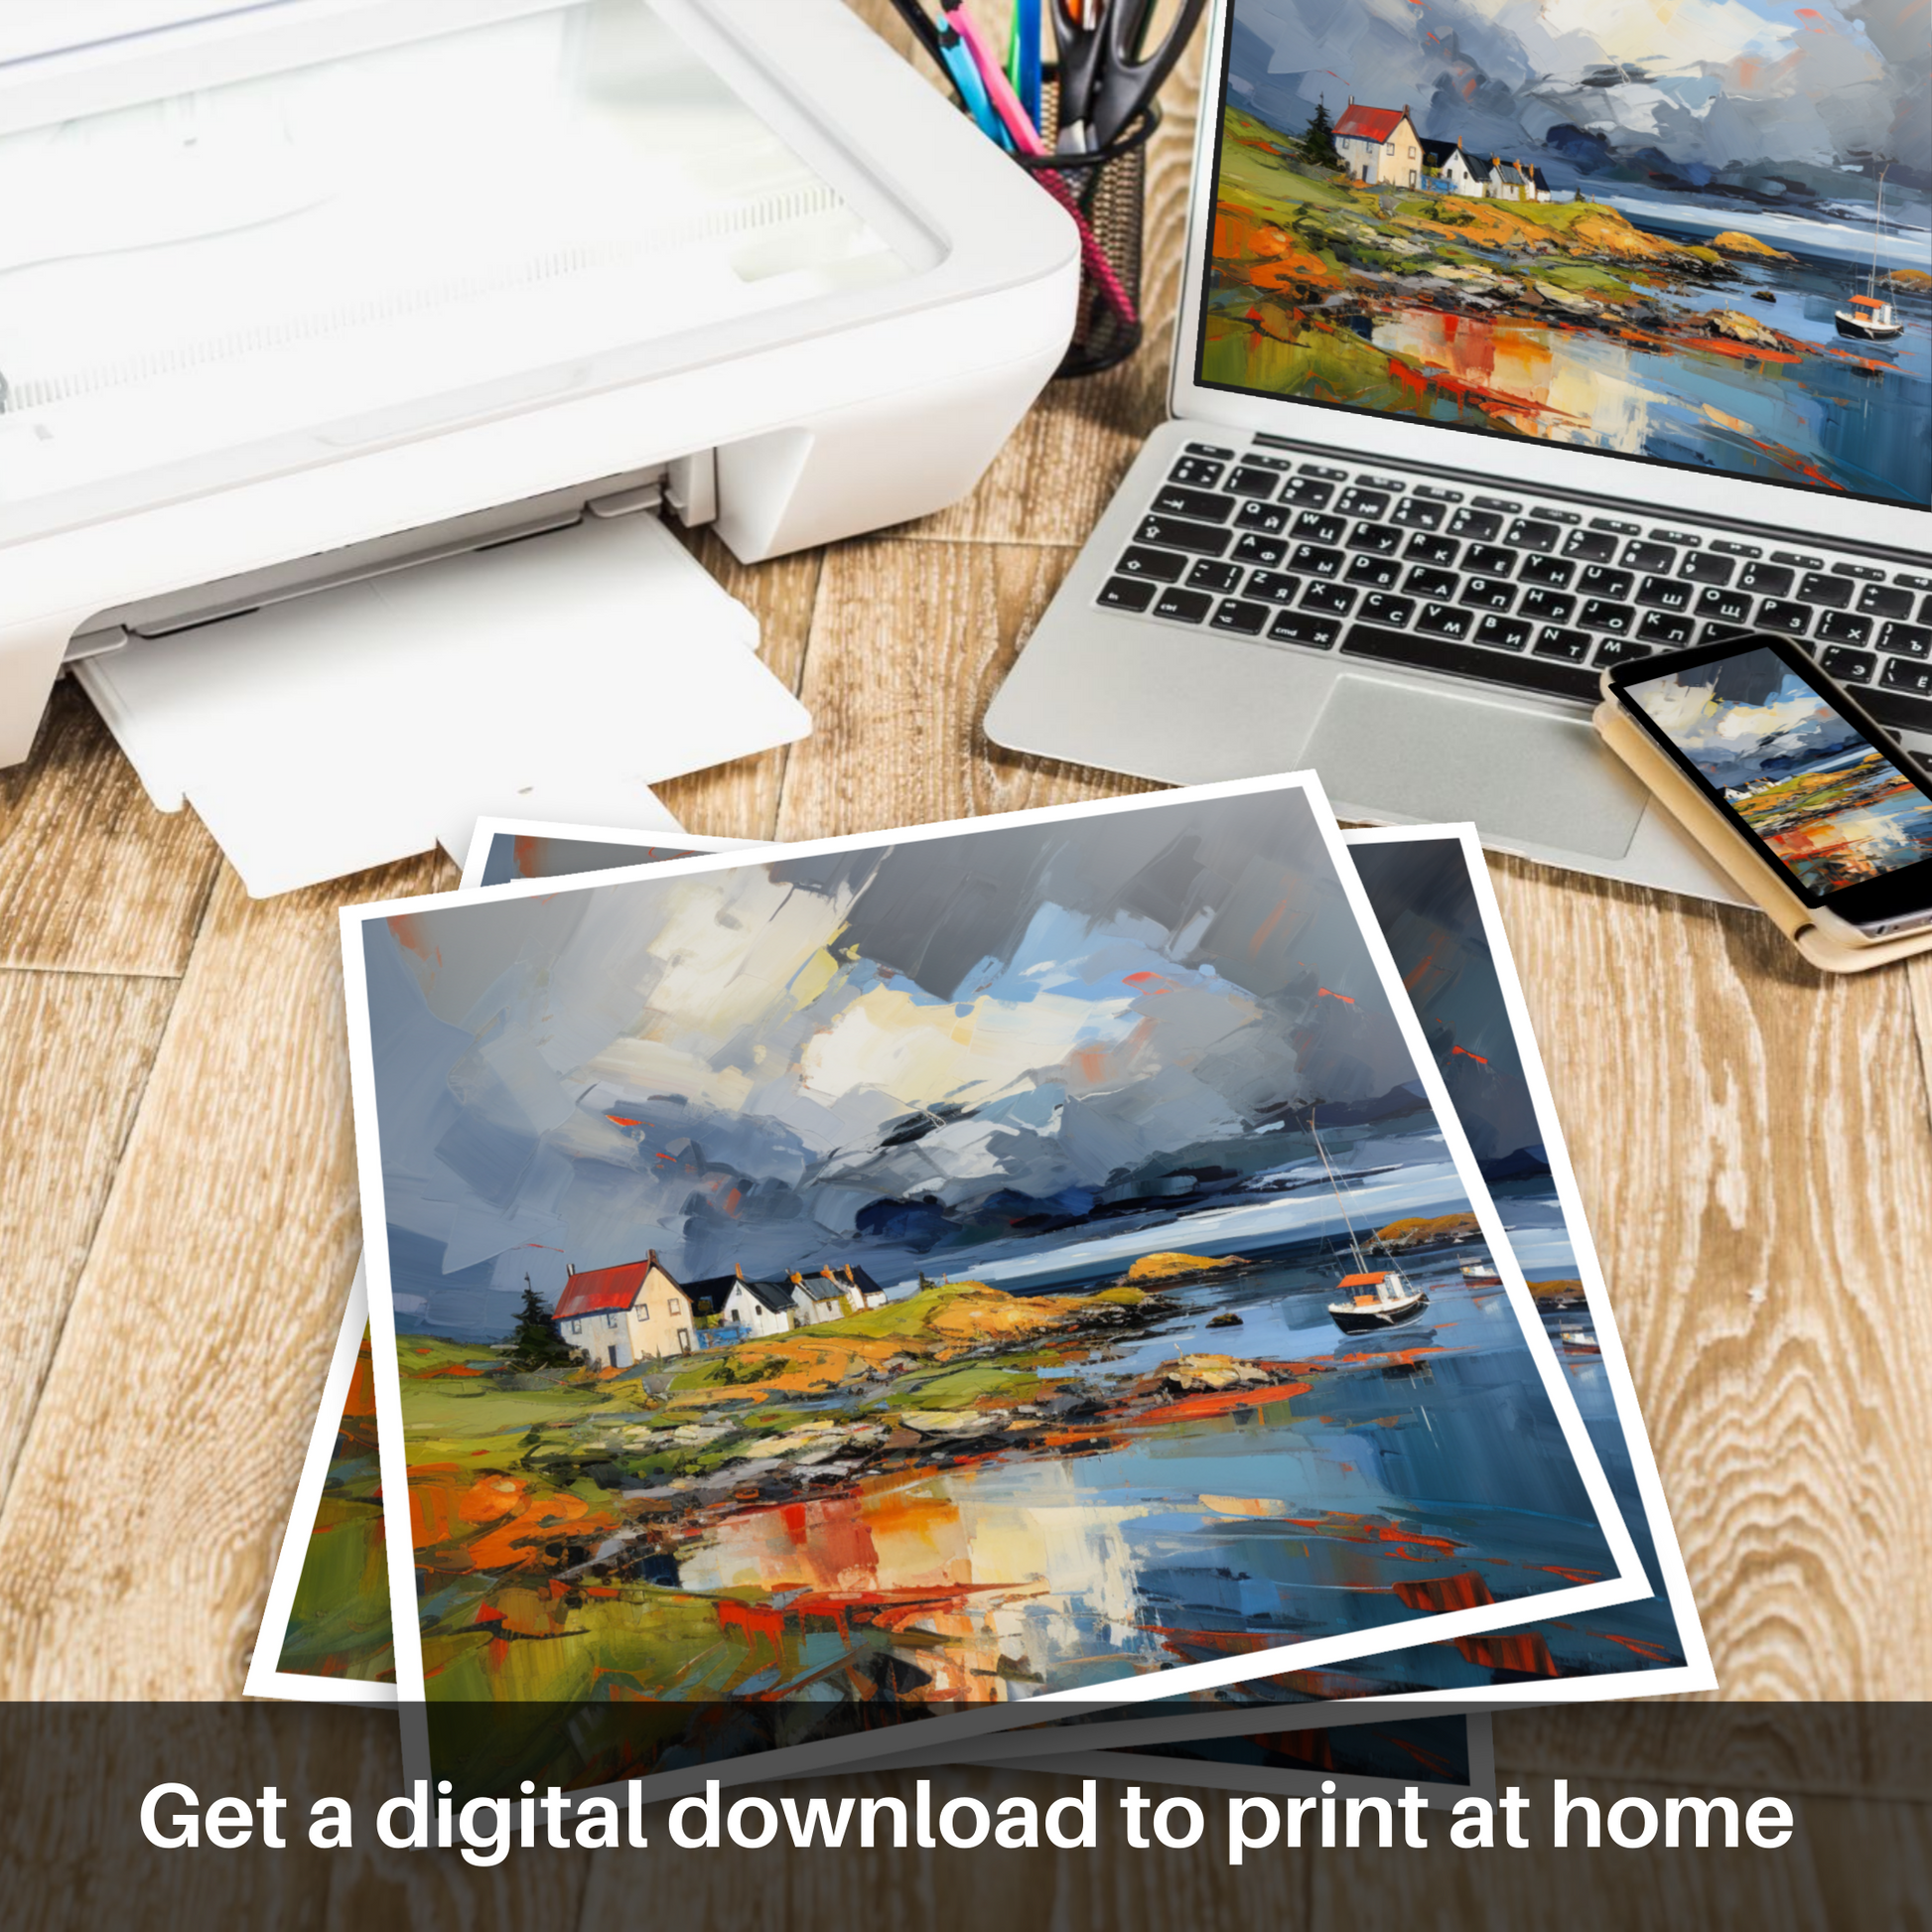 Downloadable and printable picture of Gairloch Harbour with a stormy sky